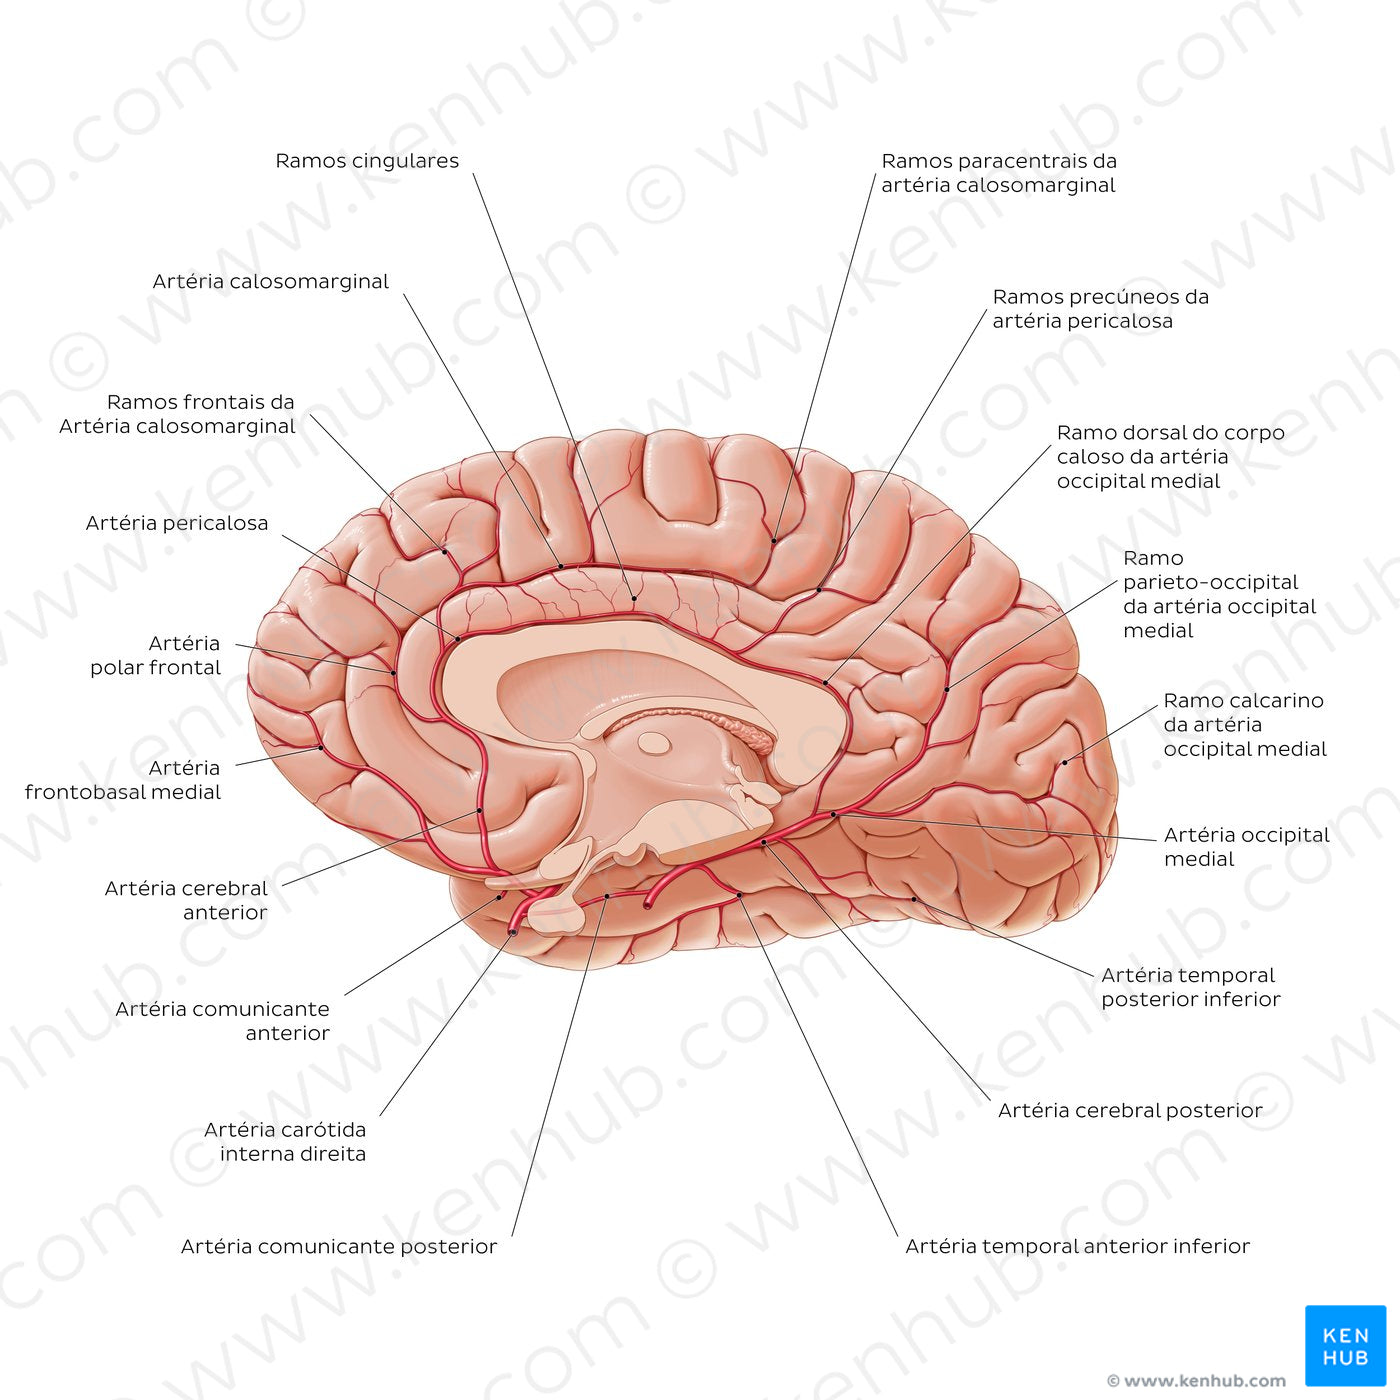 Arteries of the brain - Medial view (Portuguese)